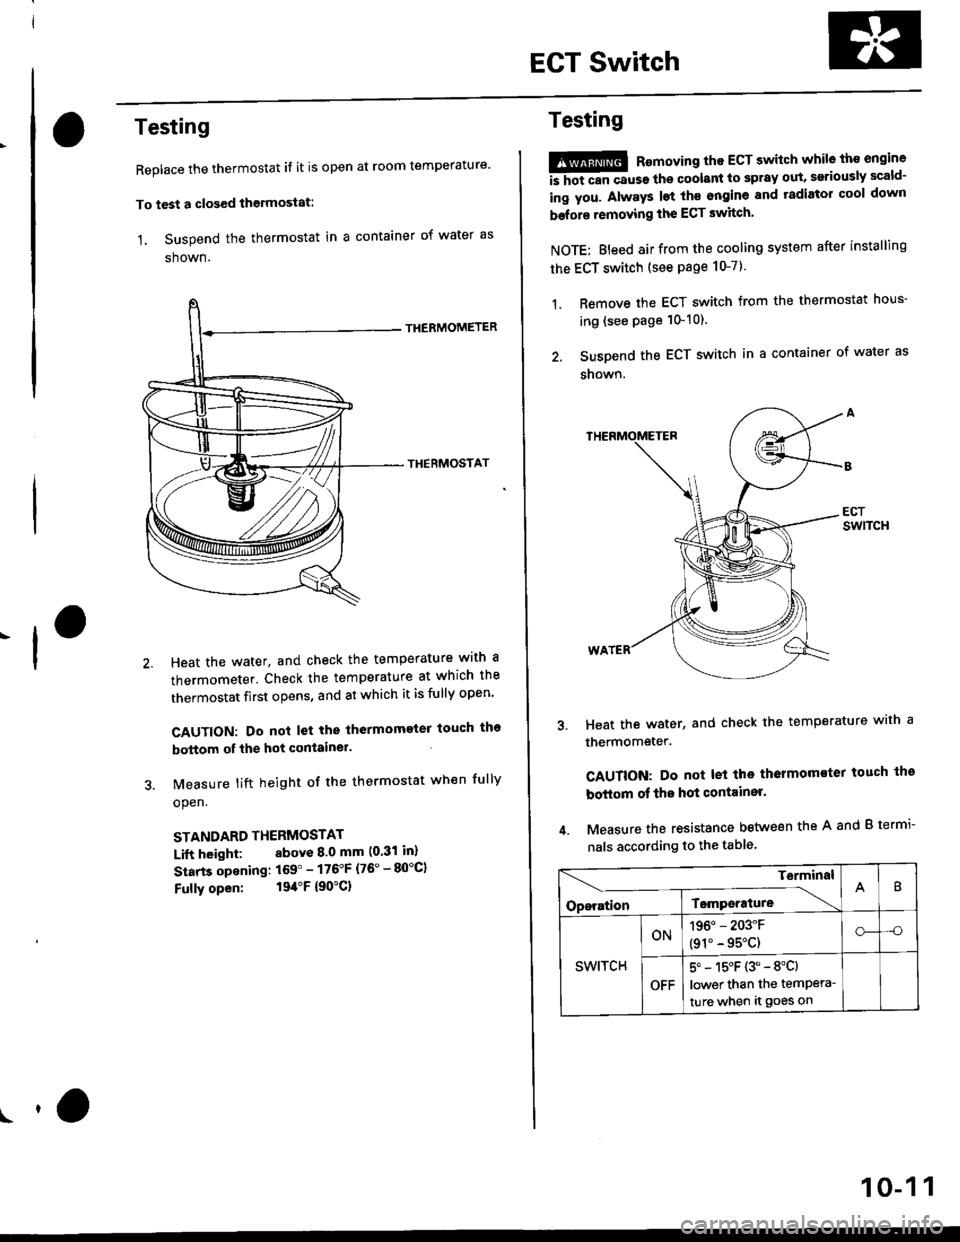 HONDA CIVIC 1997 6.G Workshop Manual EGT Switch
-f
Testing
Replace the thermostat if it is open at room temperature
To test a closed thermostat:
1, Suspend the thermostat in a container of water as
shown.
THEBMOMETER
THERMOSTAT
Heat the